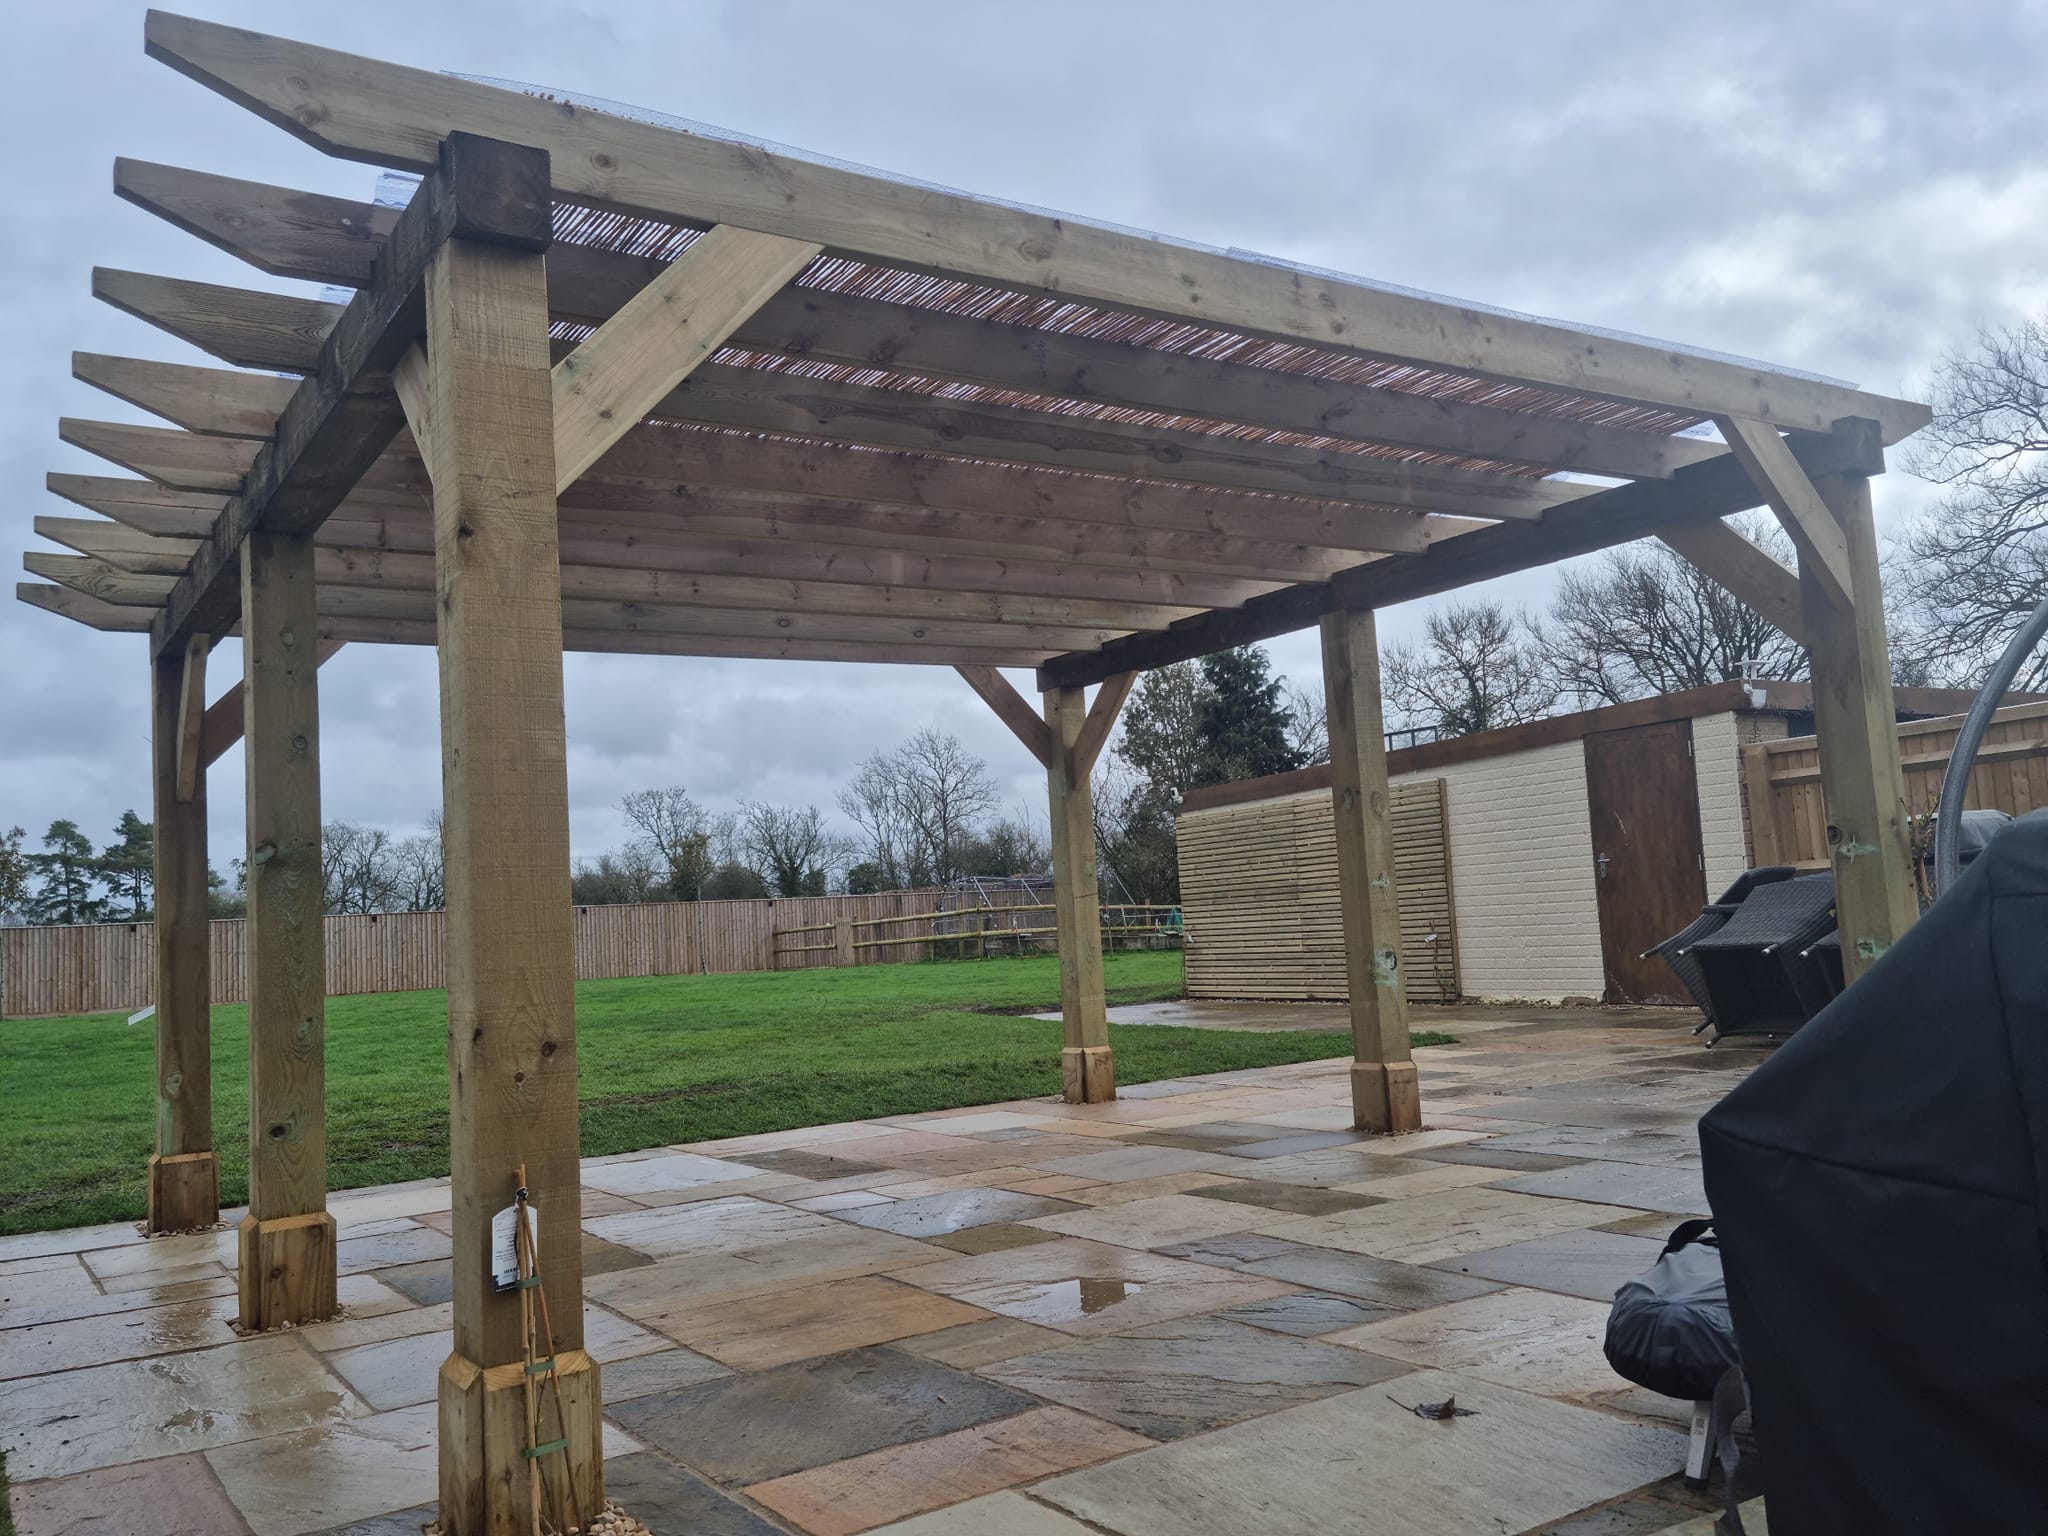 Patio area using both reclaimed and new sandstone pavers with a pergola covered seating area. Completed recently in Murcott